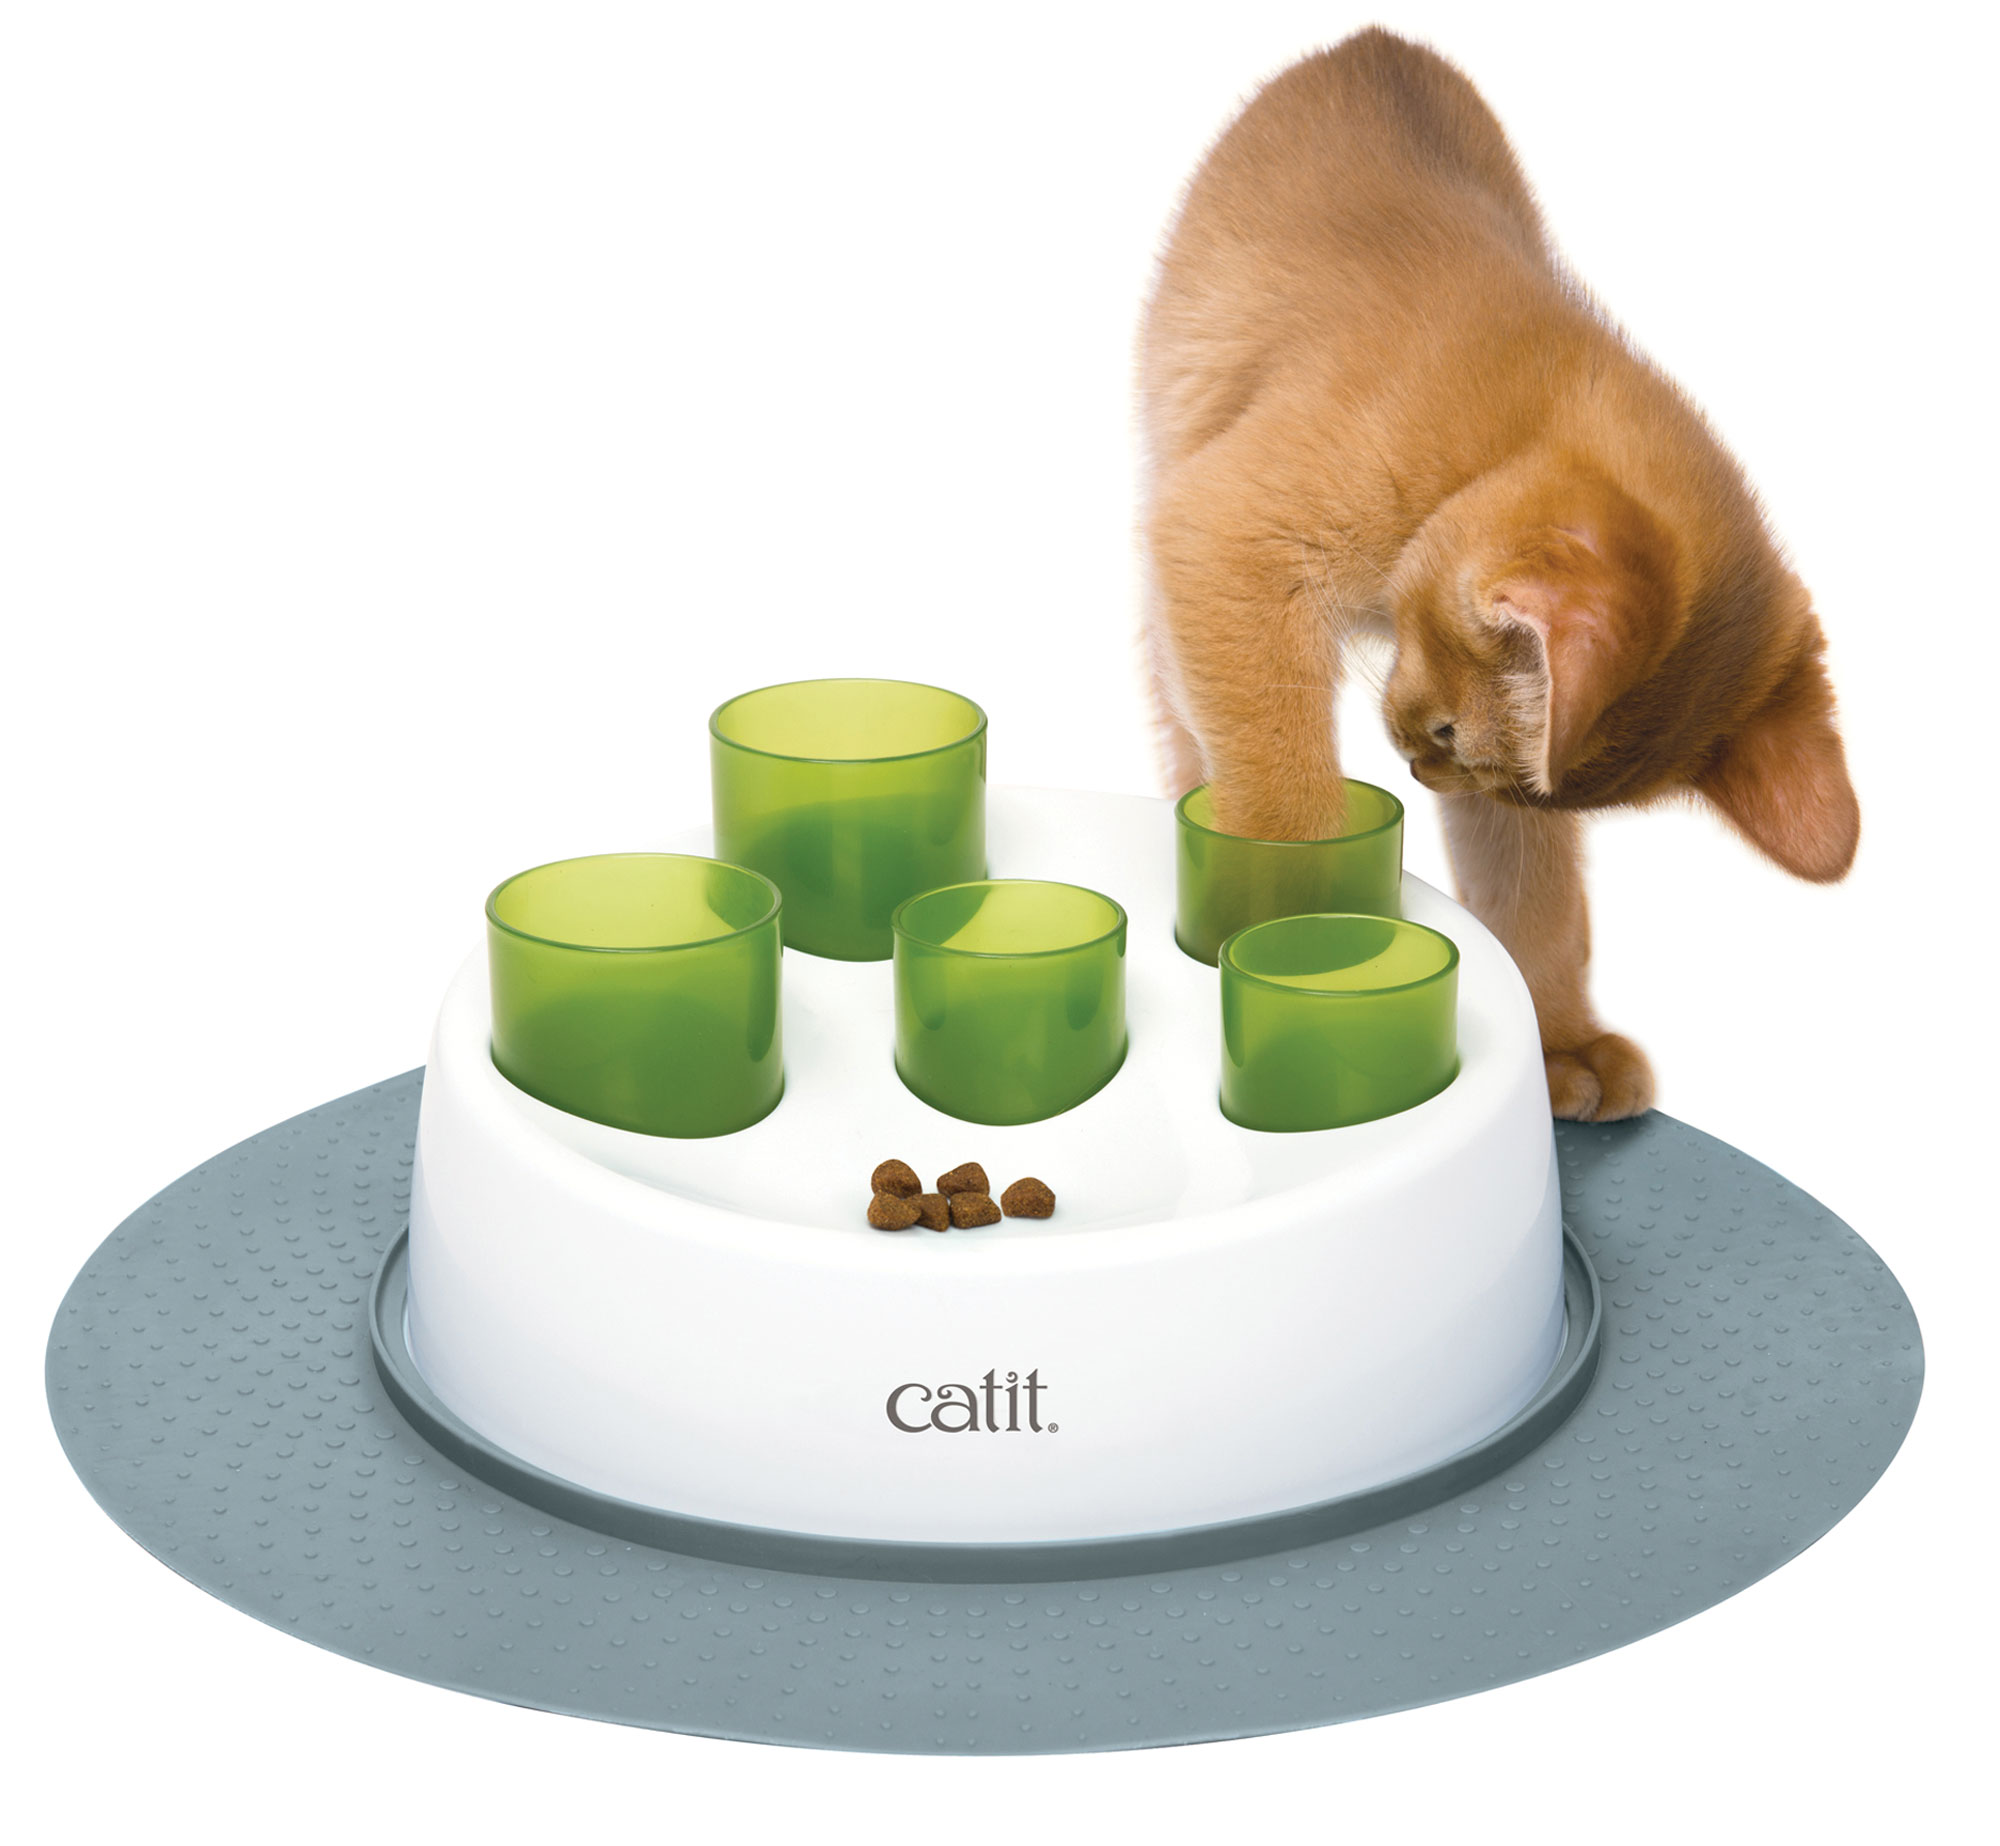 Catit interactive puzzle toy anxiety busters.